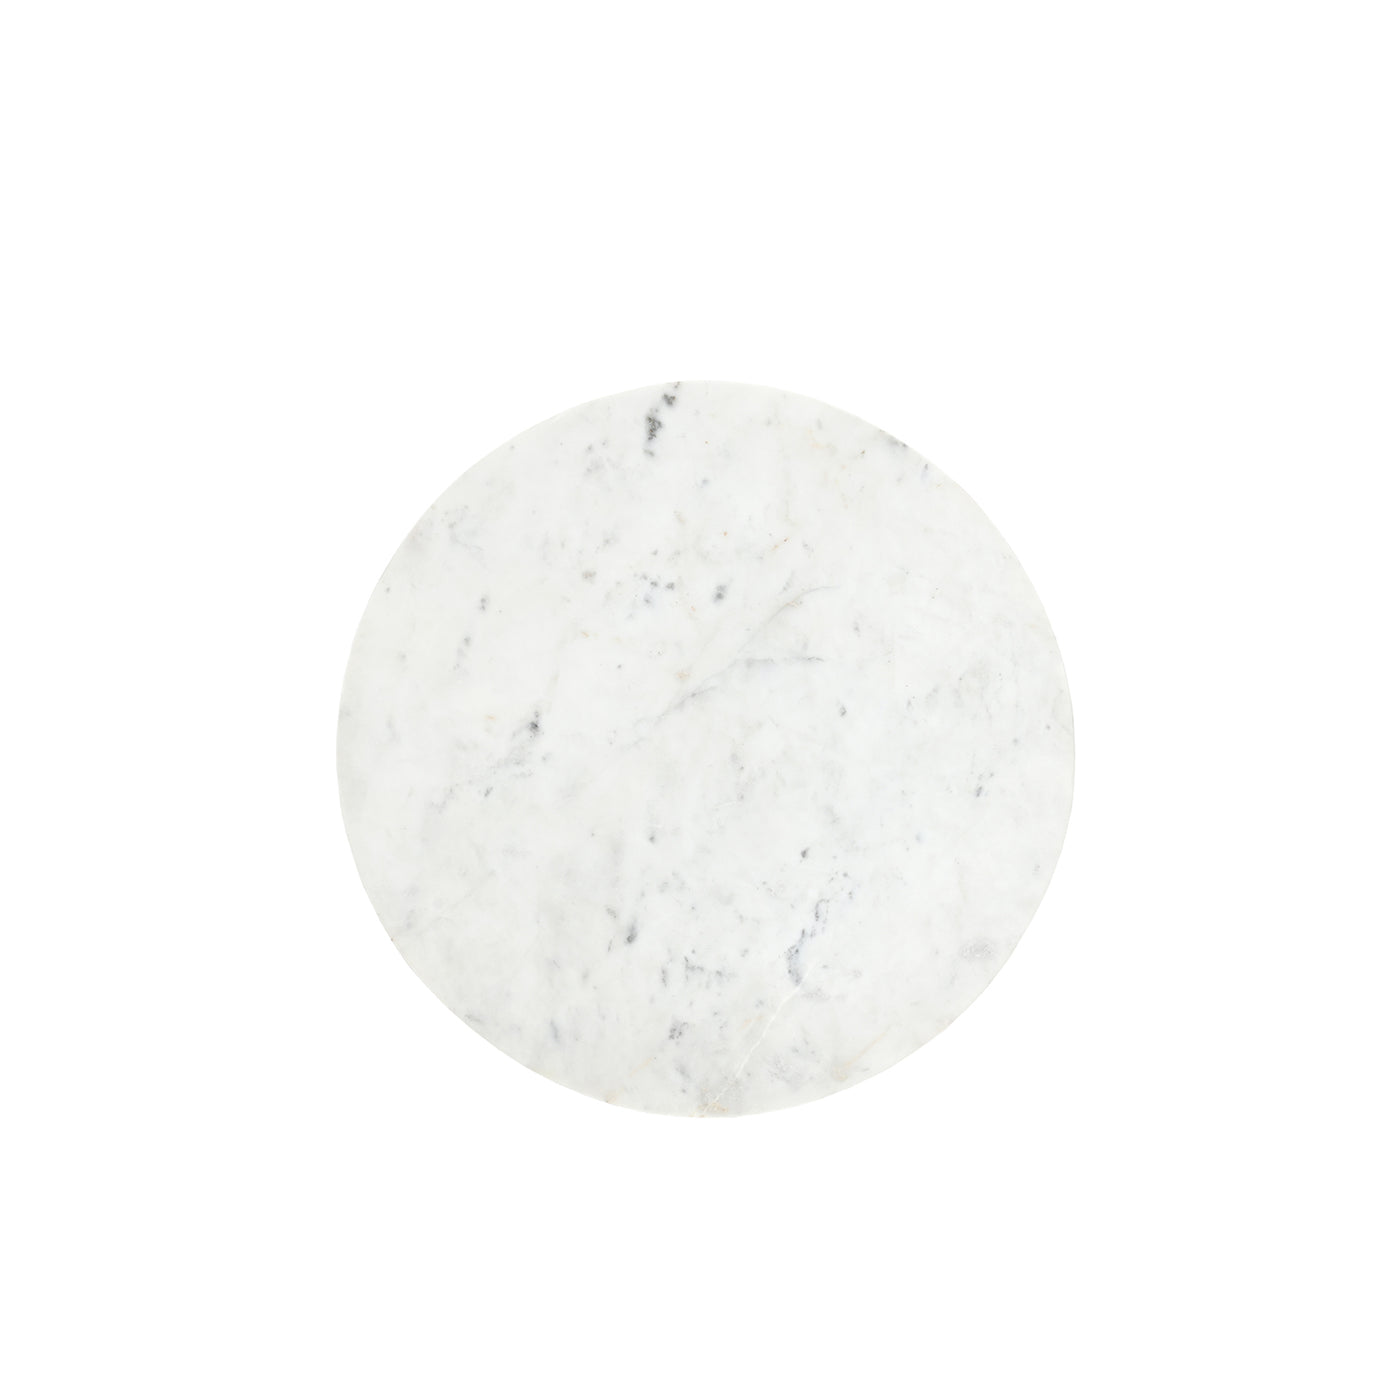 Kenza Round Marble Side Table